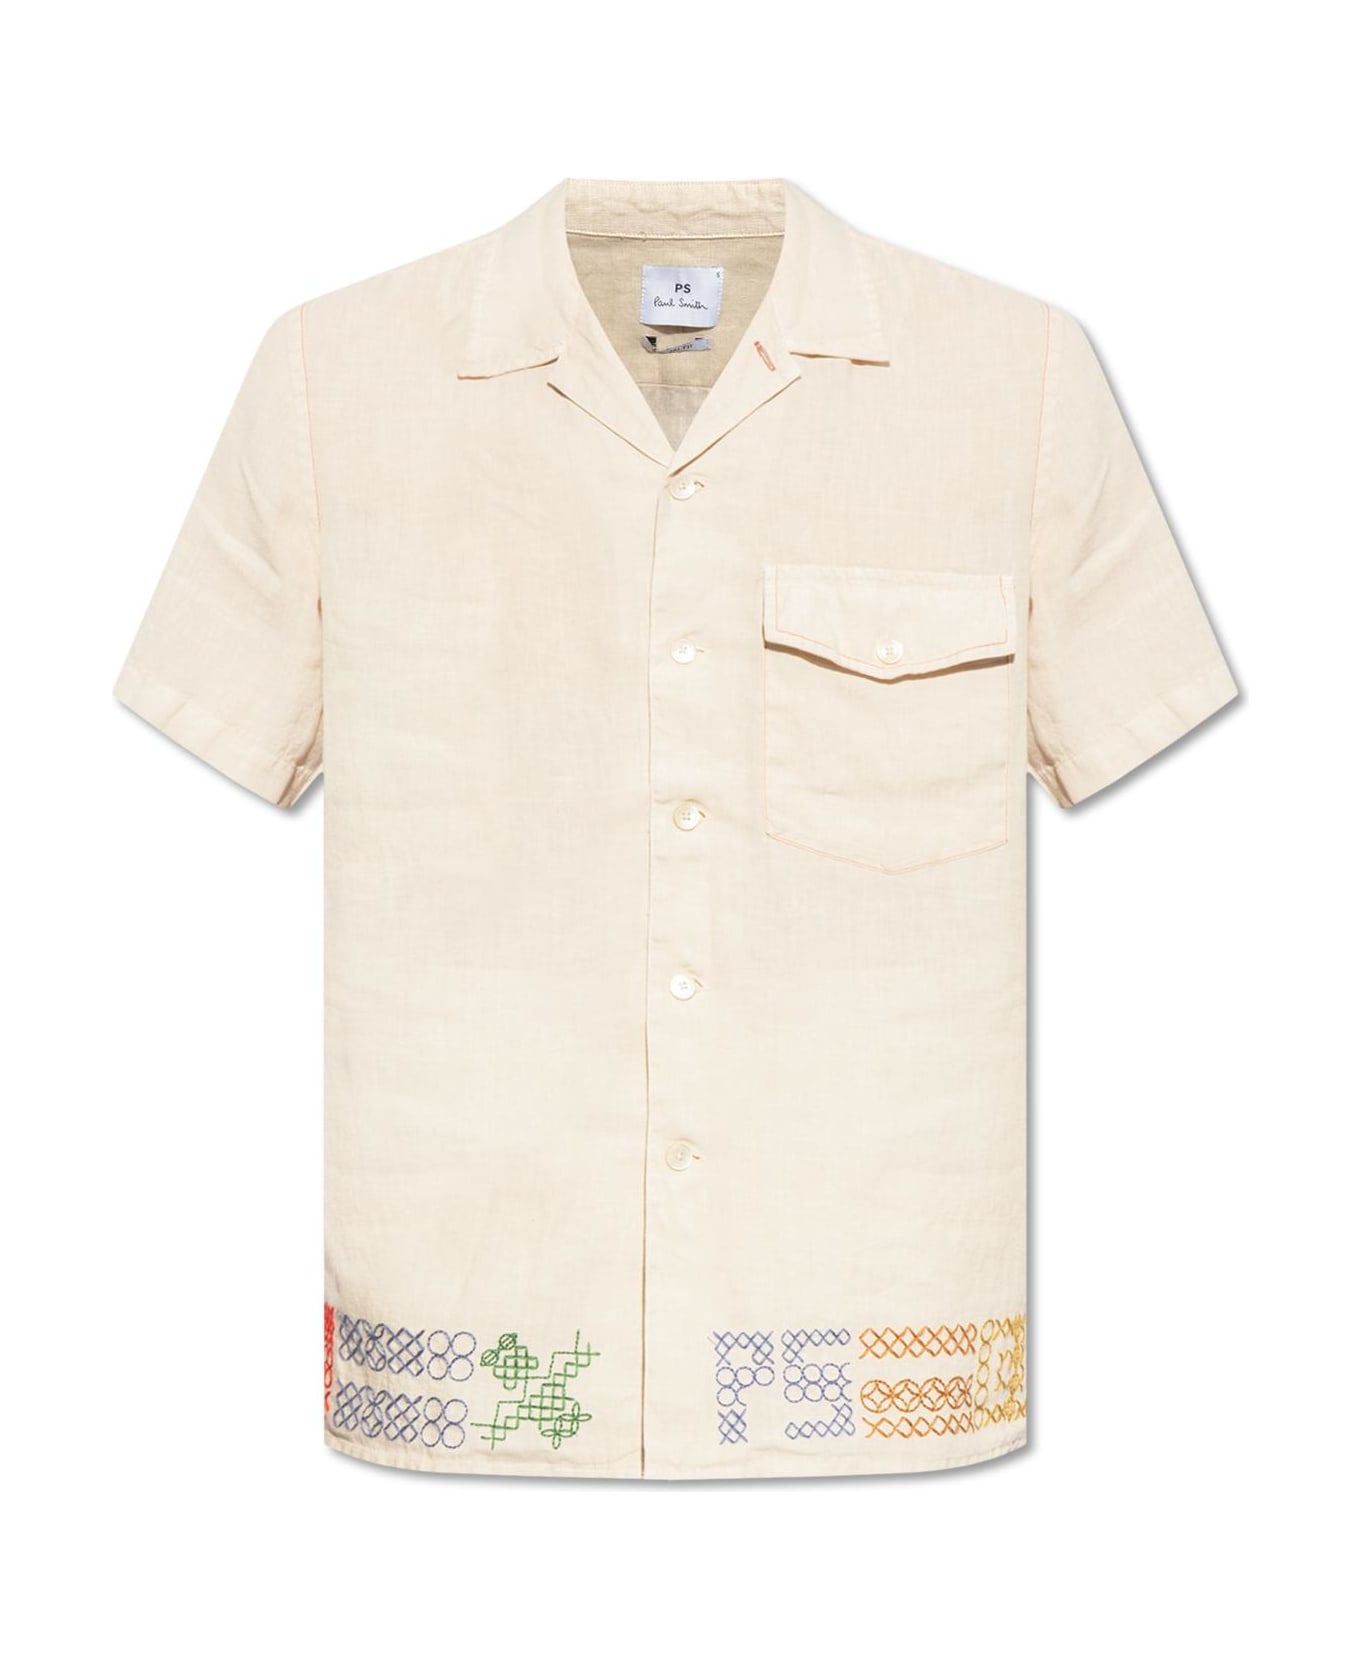 Paul Smith Linen Shirt With Short Sleeves - Beige